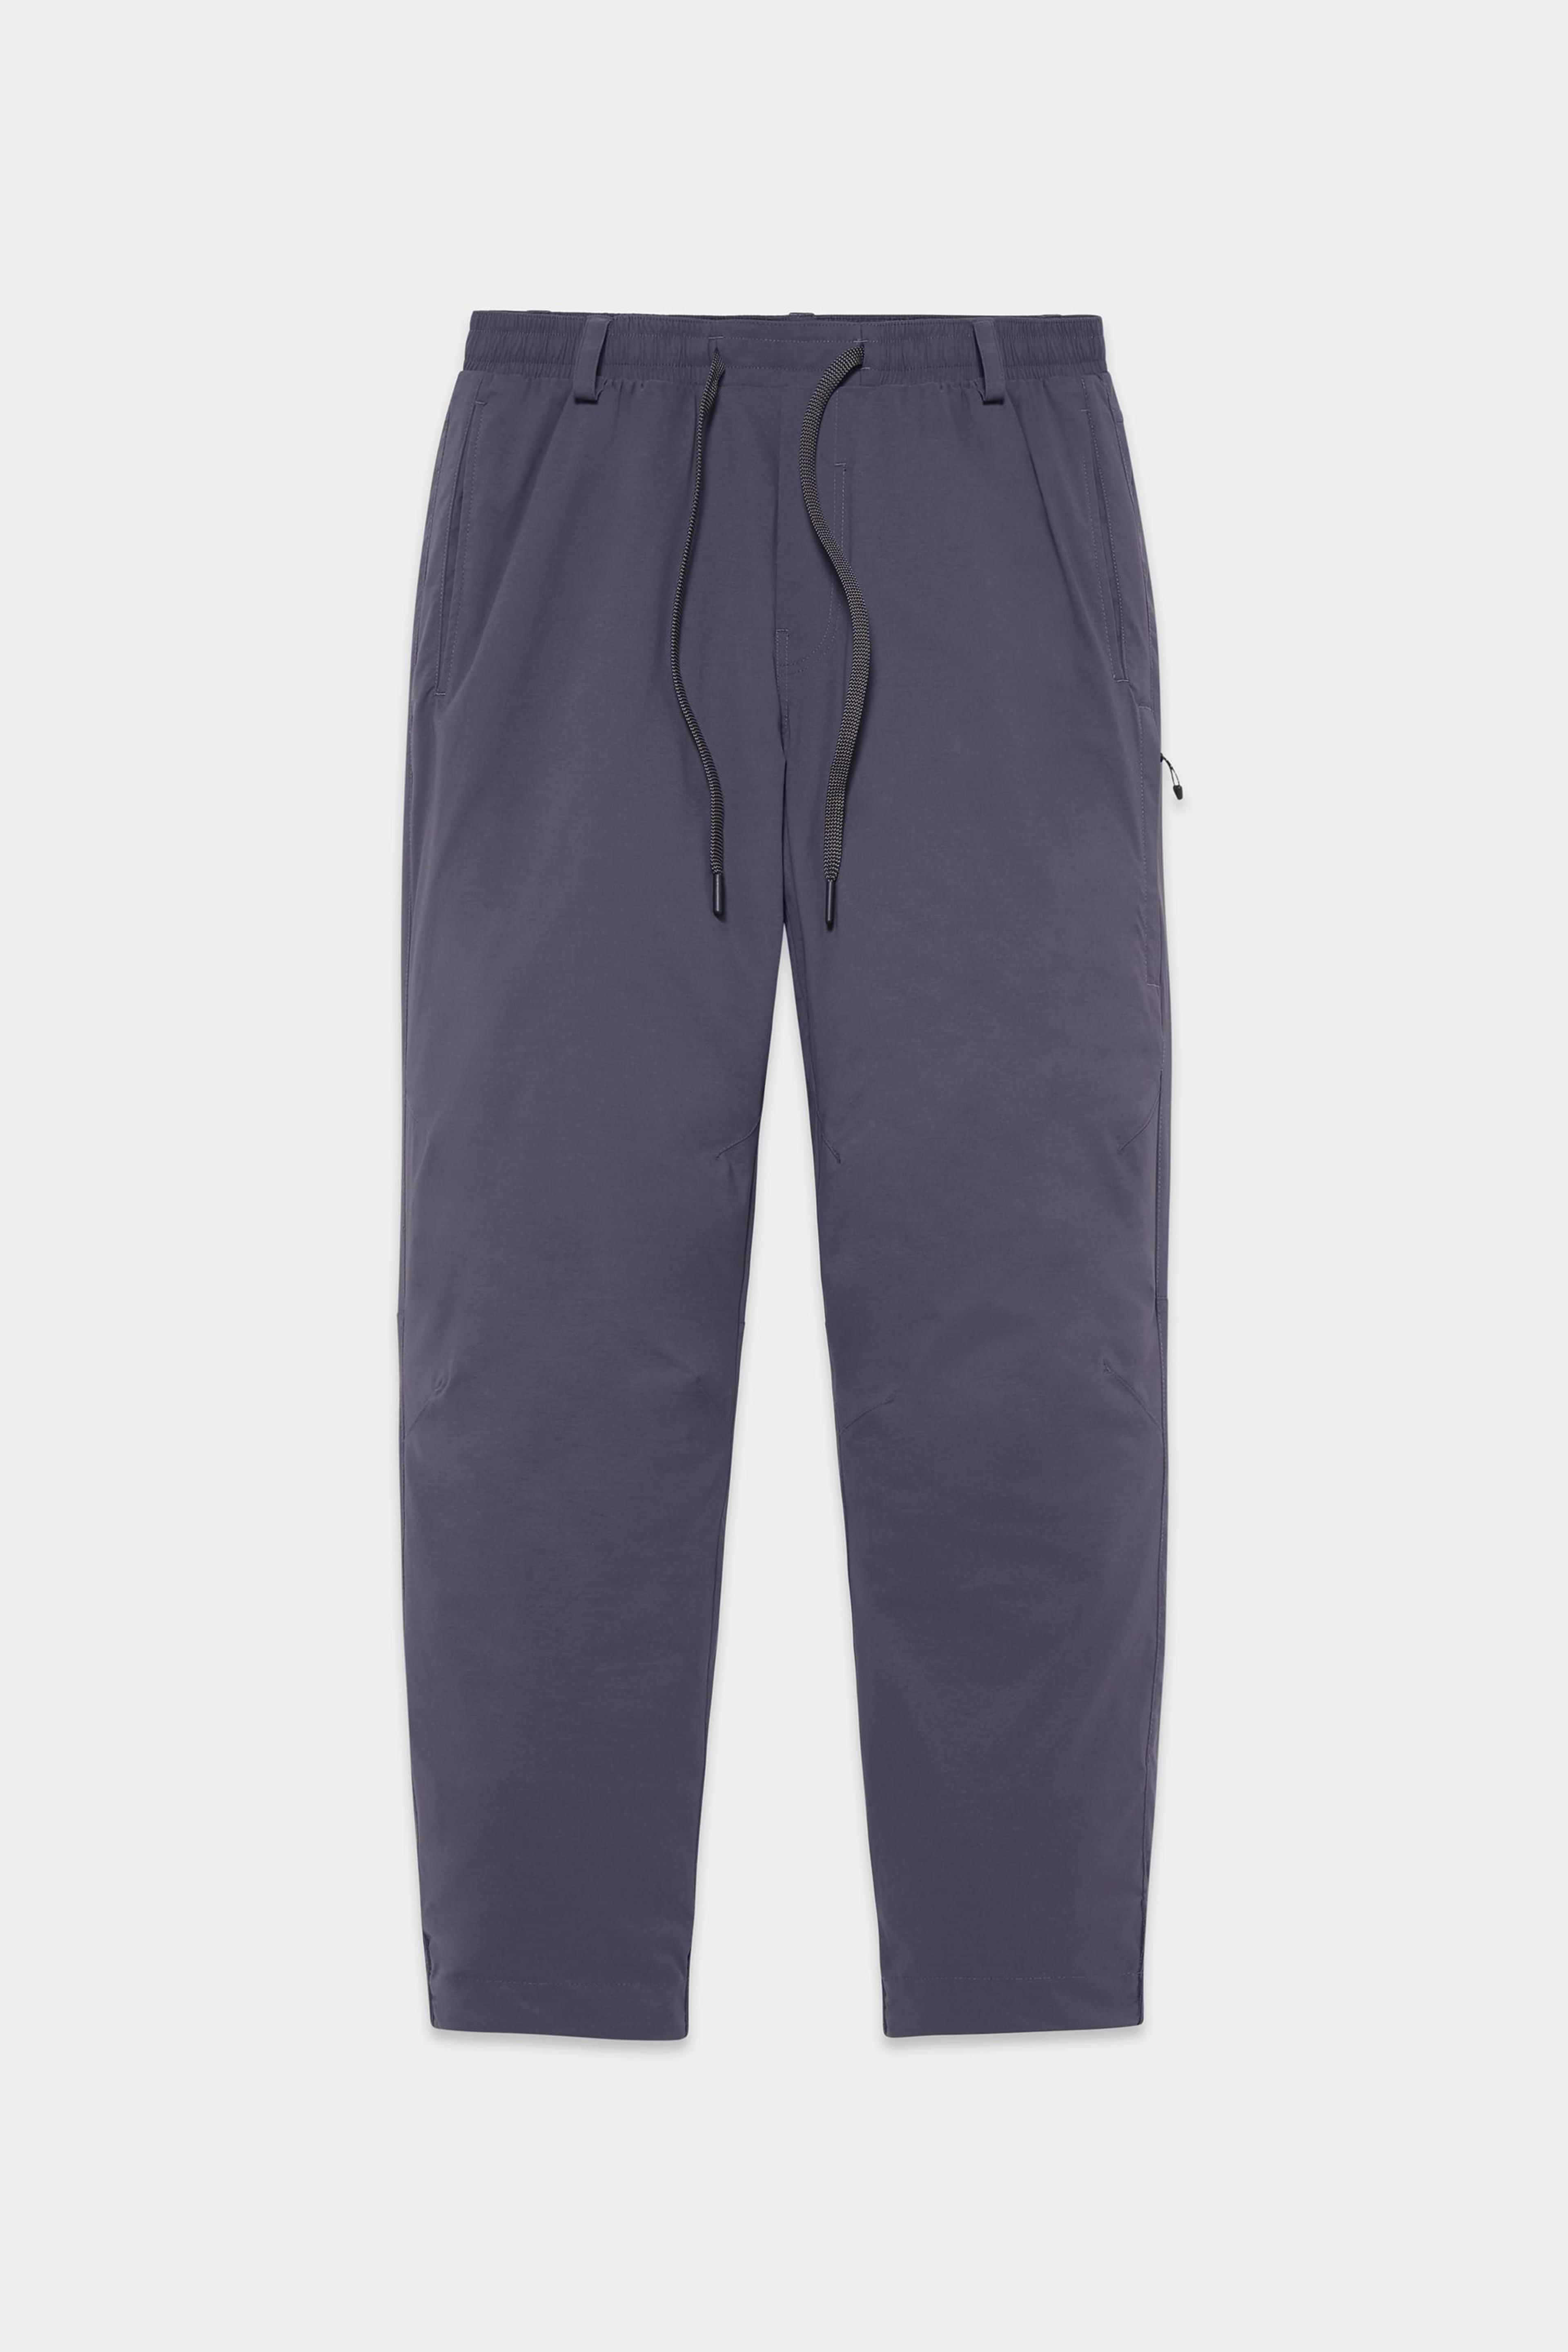 Alternate View 39 of 686 Men's Thermadry Merino-Lined Insulated Pant